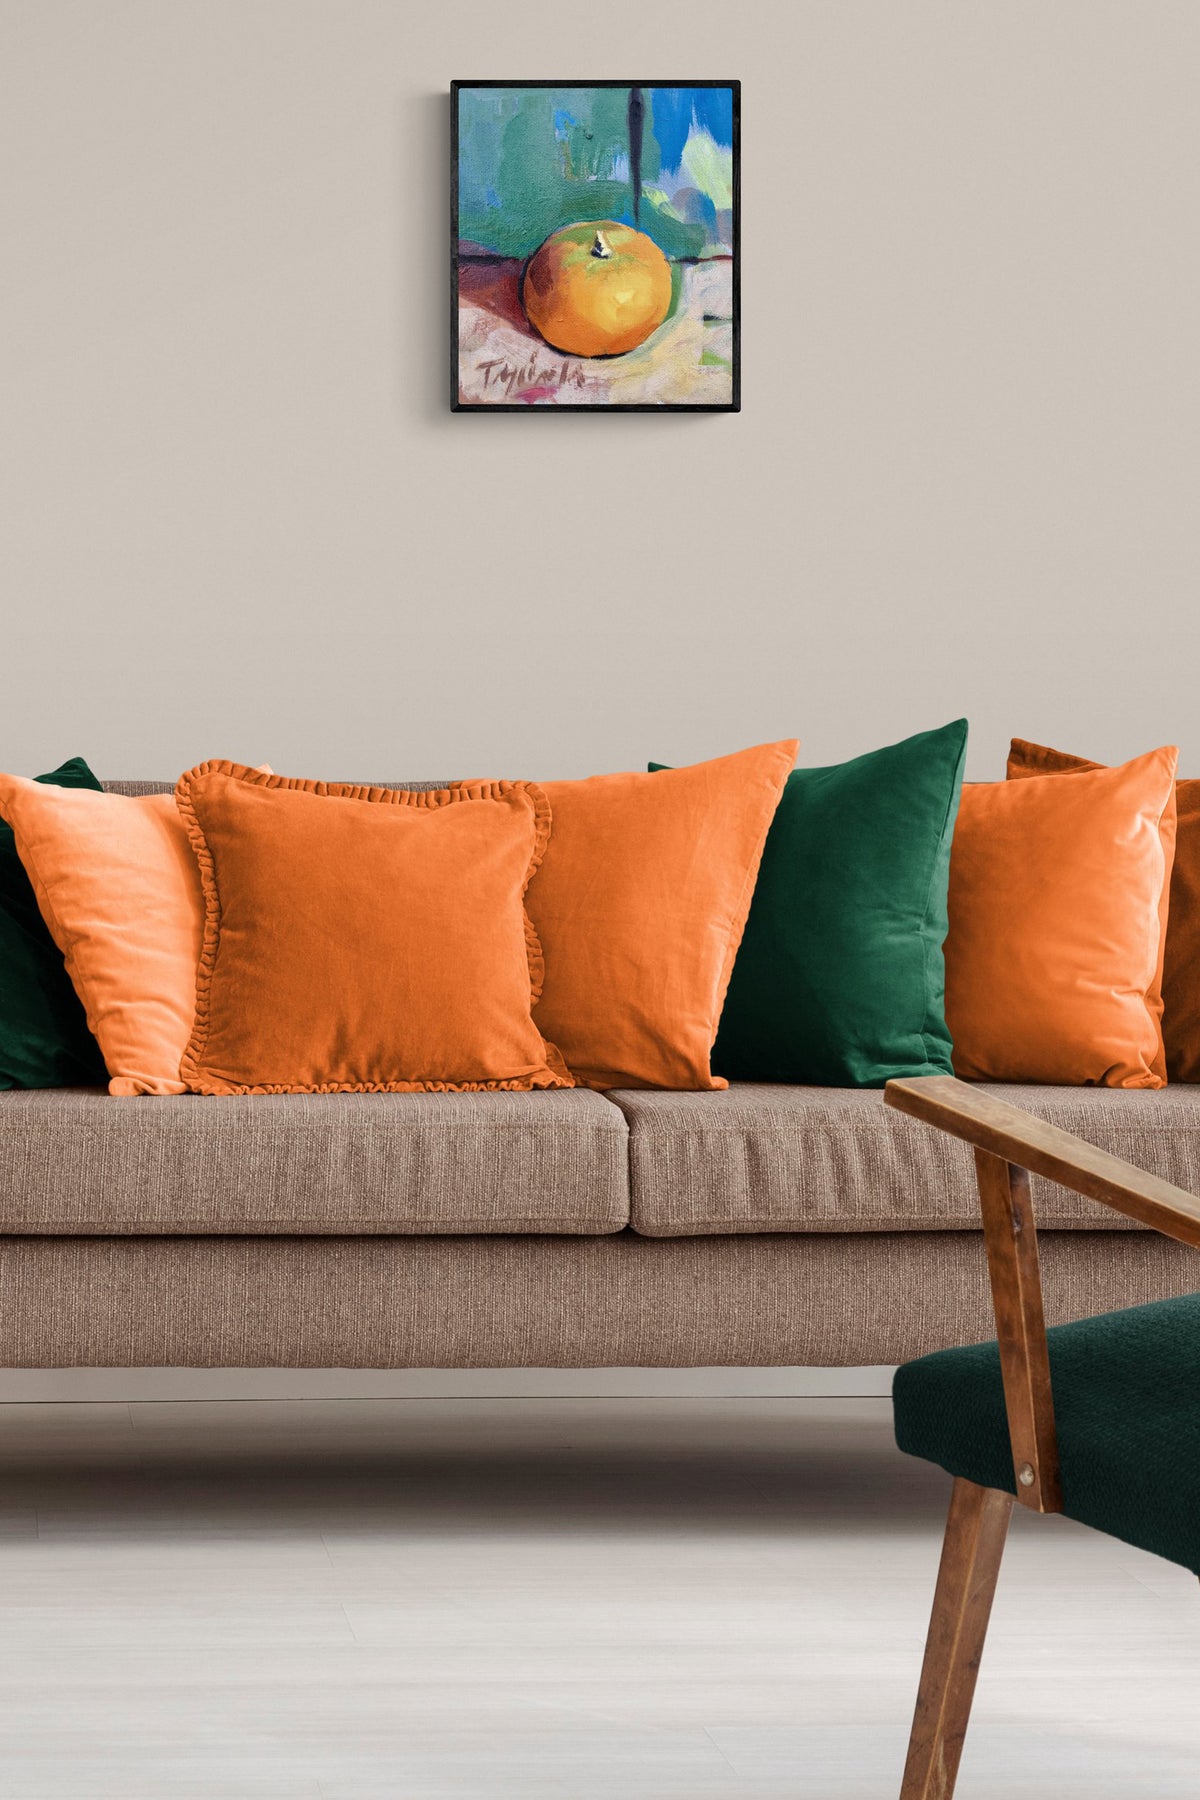 Impressionistic Abstract Orange painting adds balance & harmony to this family room